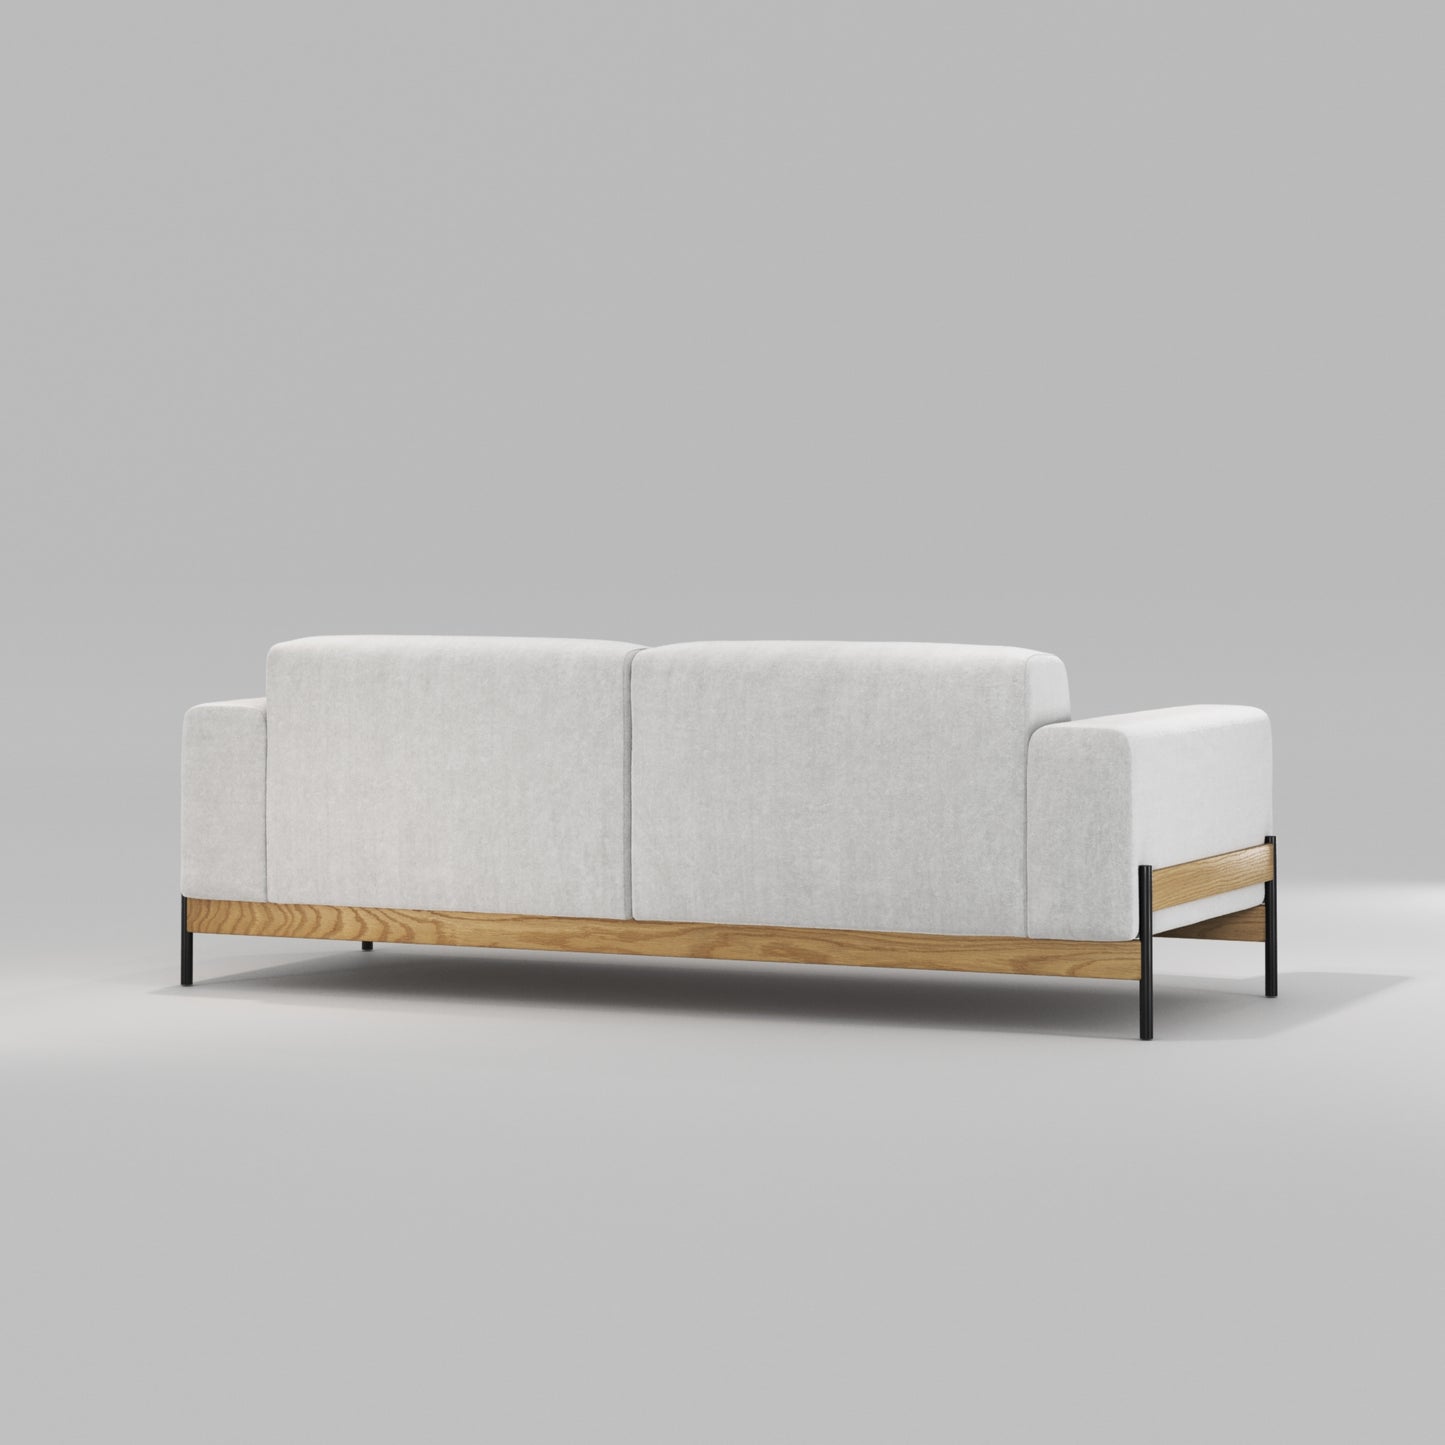 BOWIE 2 Seater Sofa